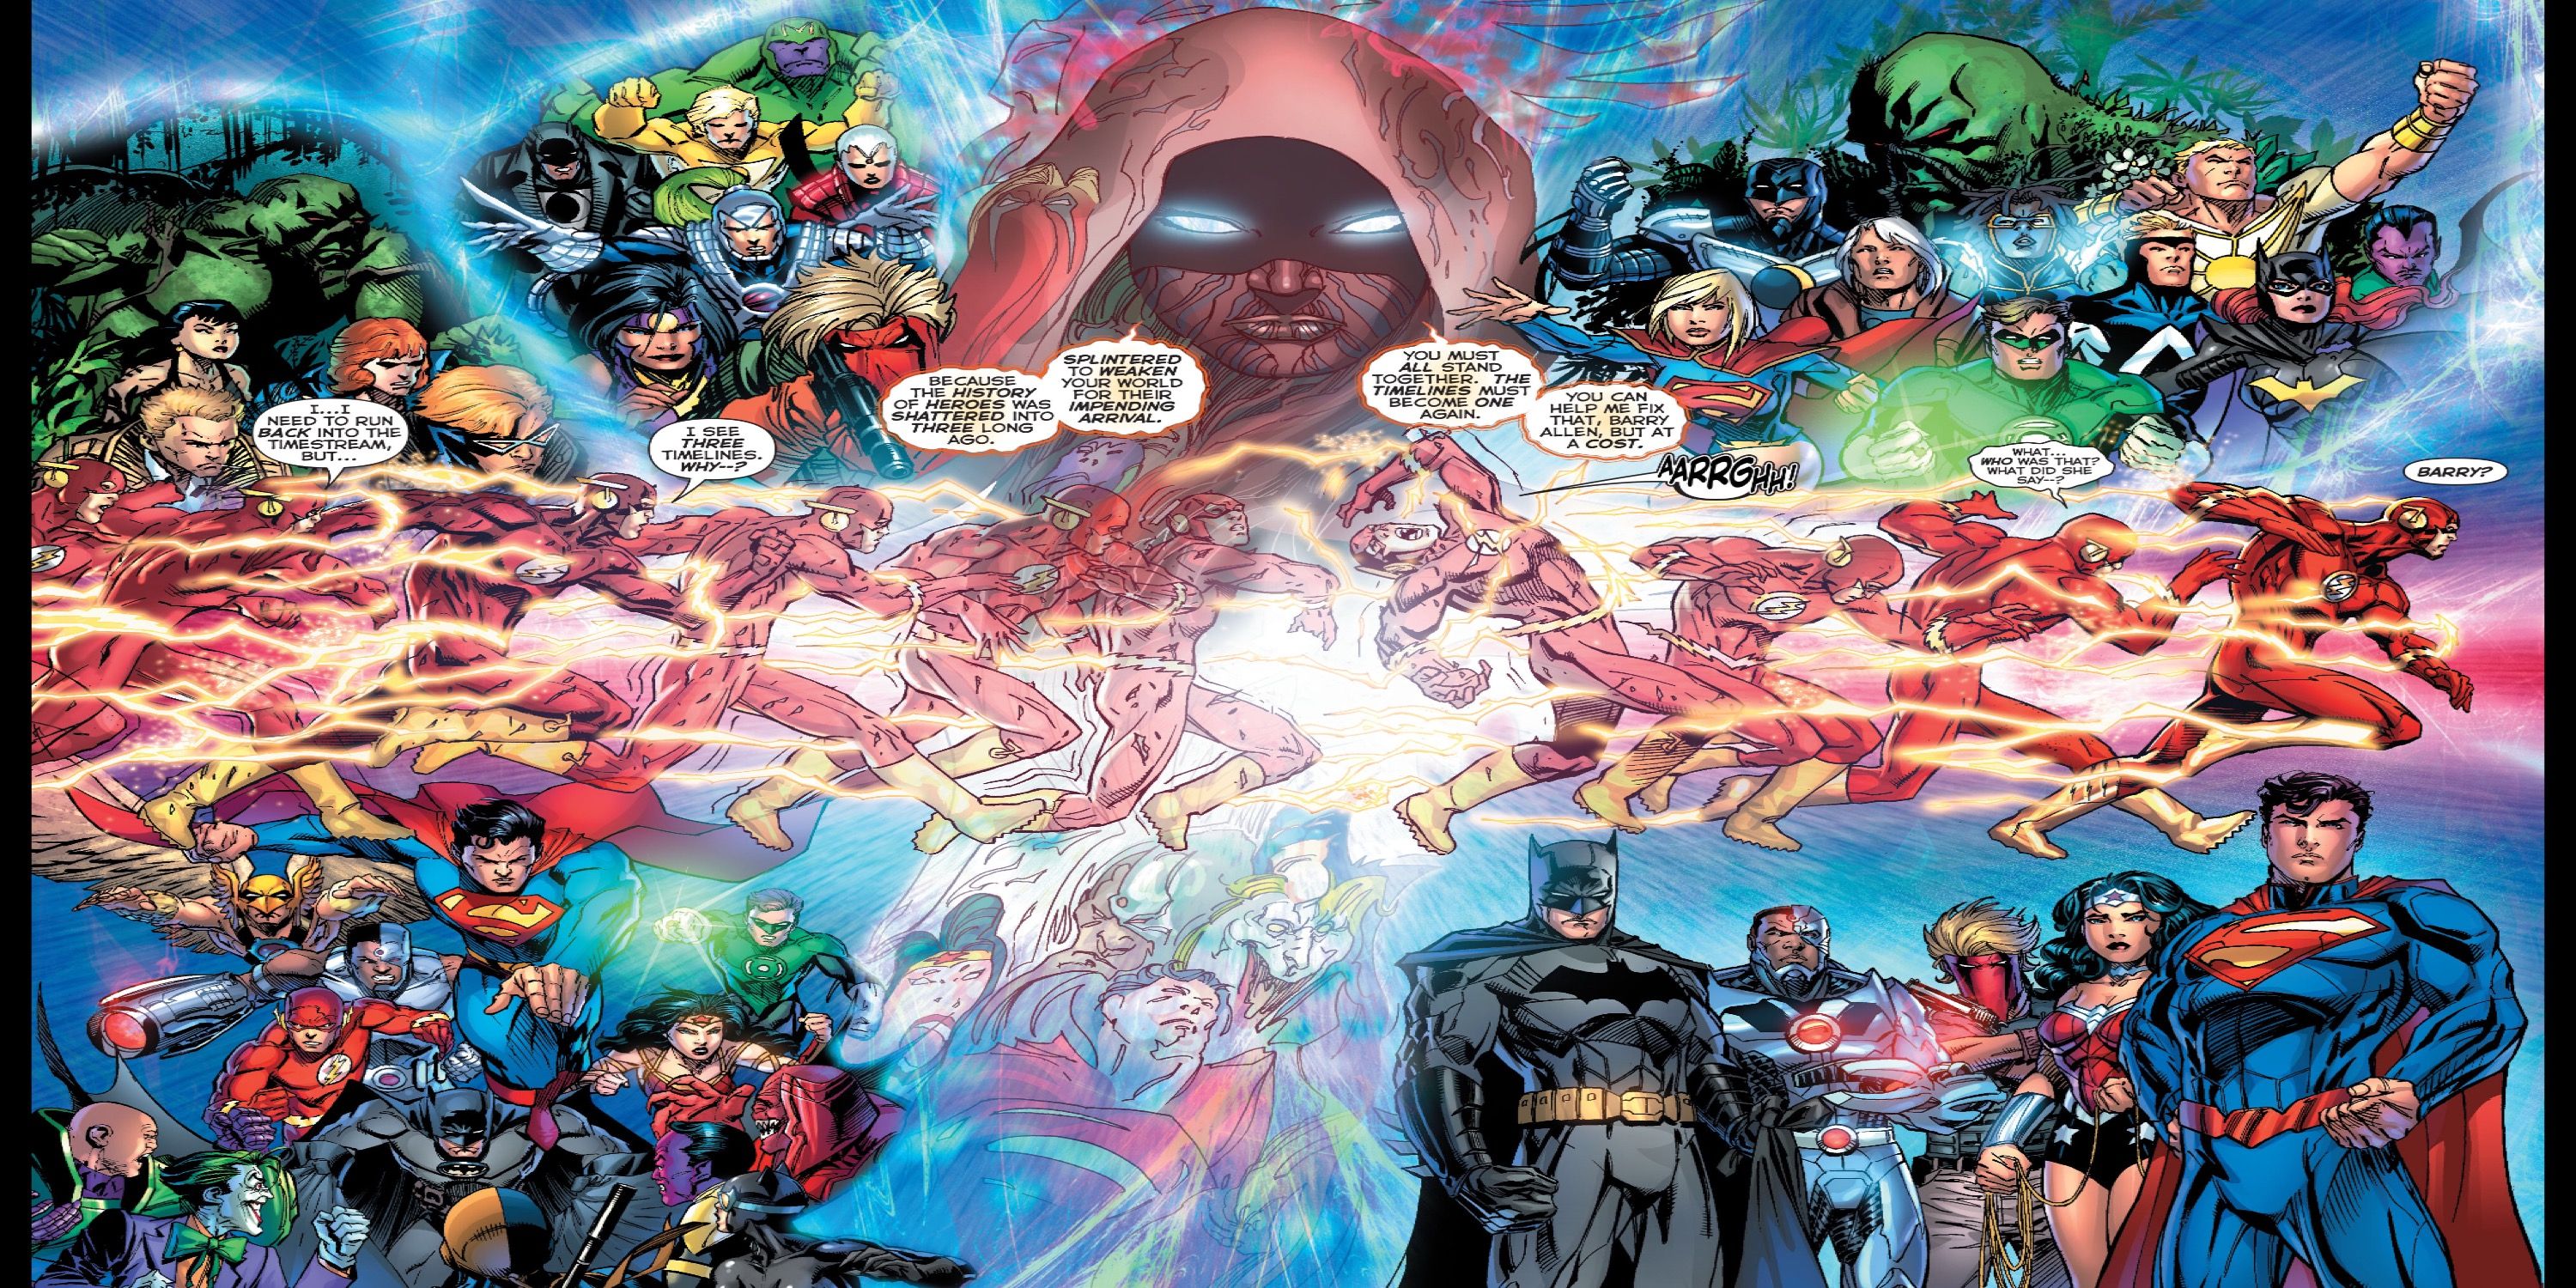 Flashpoint becomes New 52